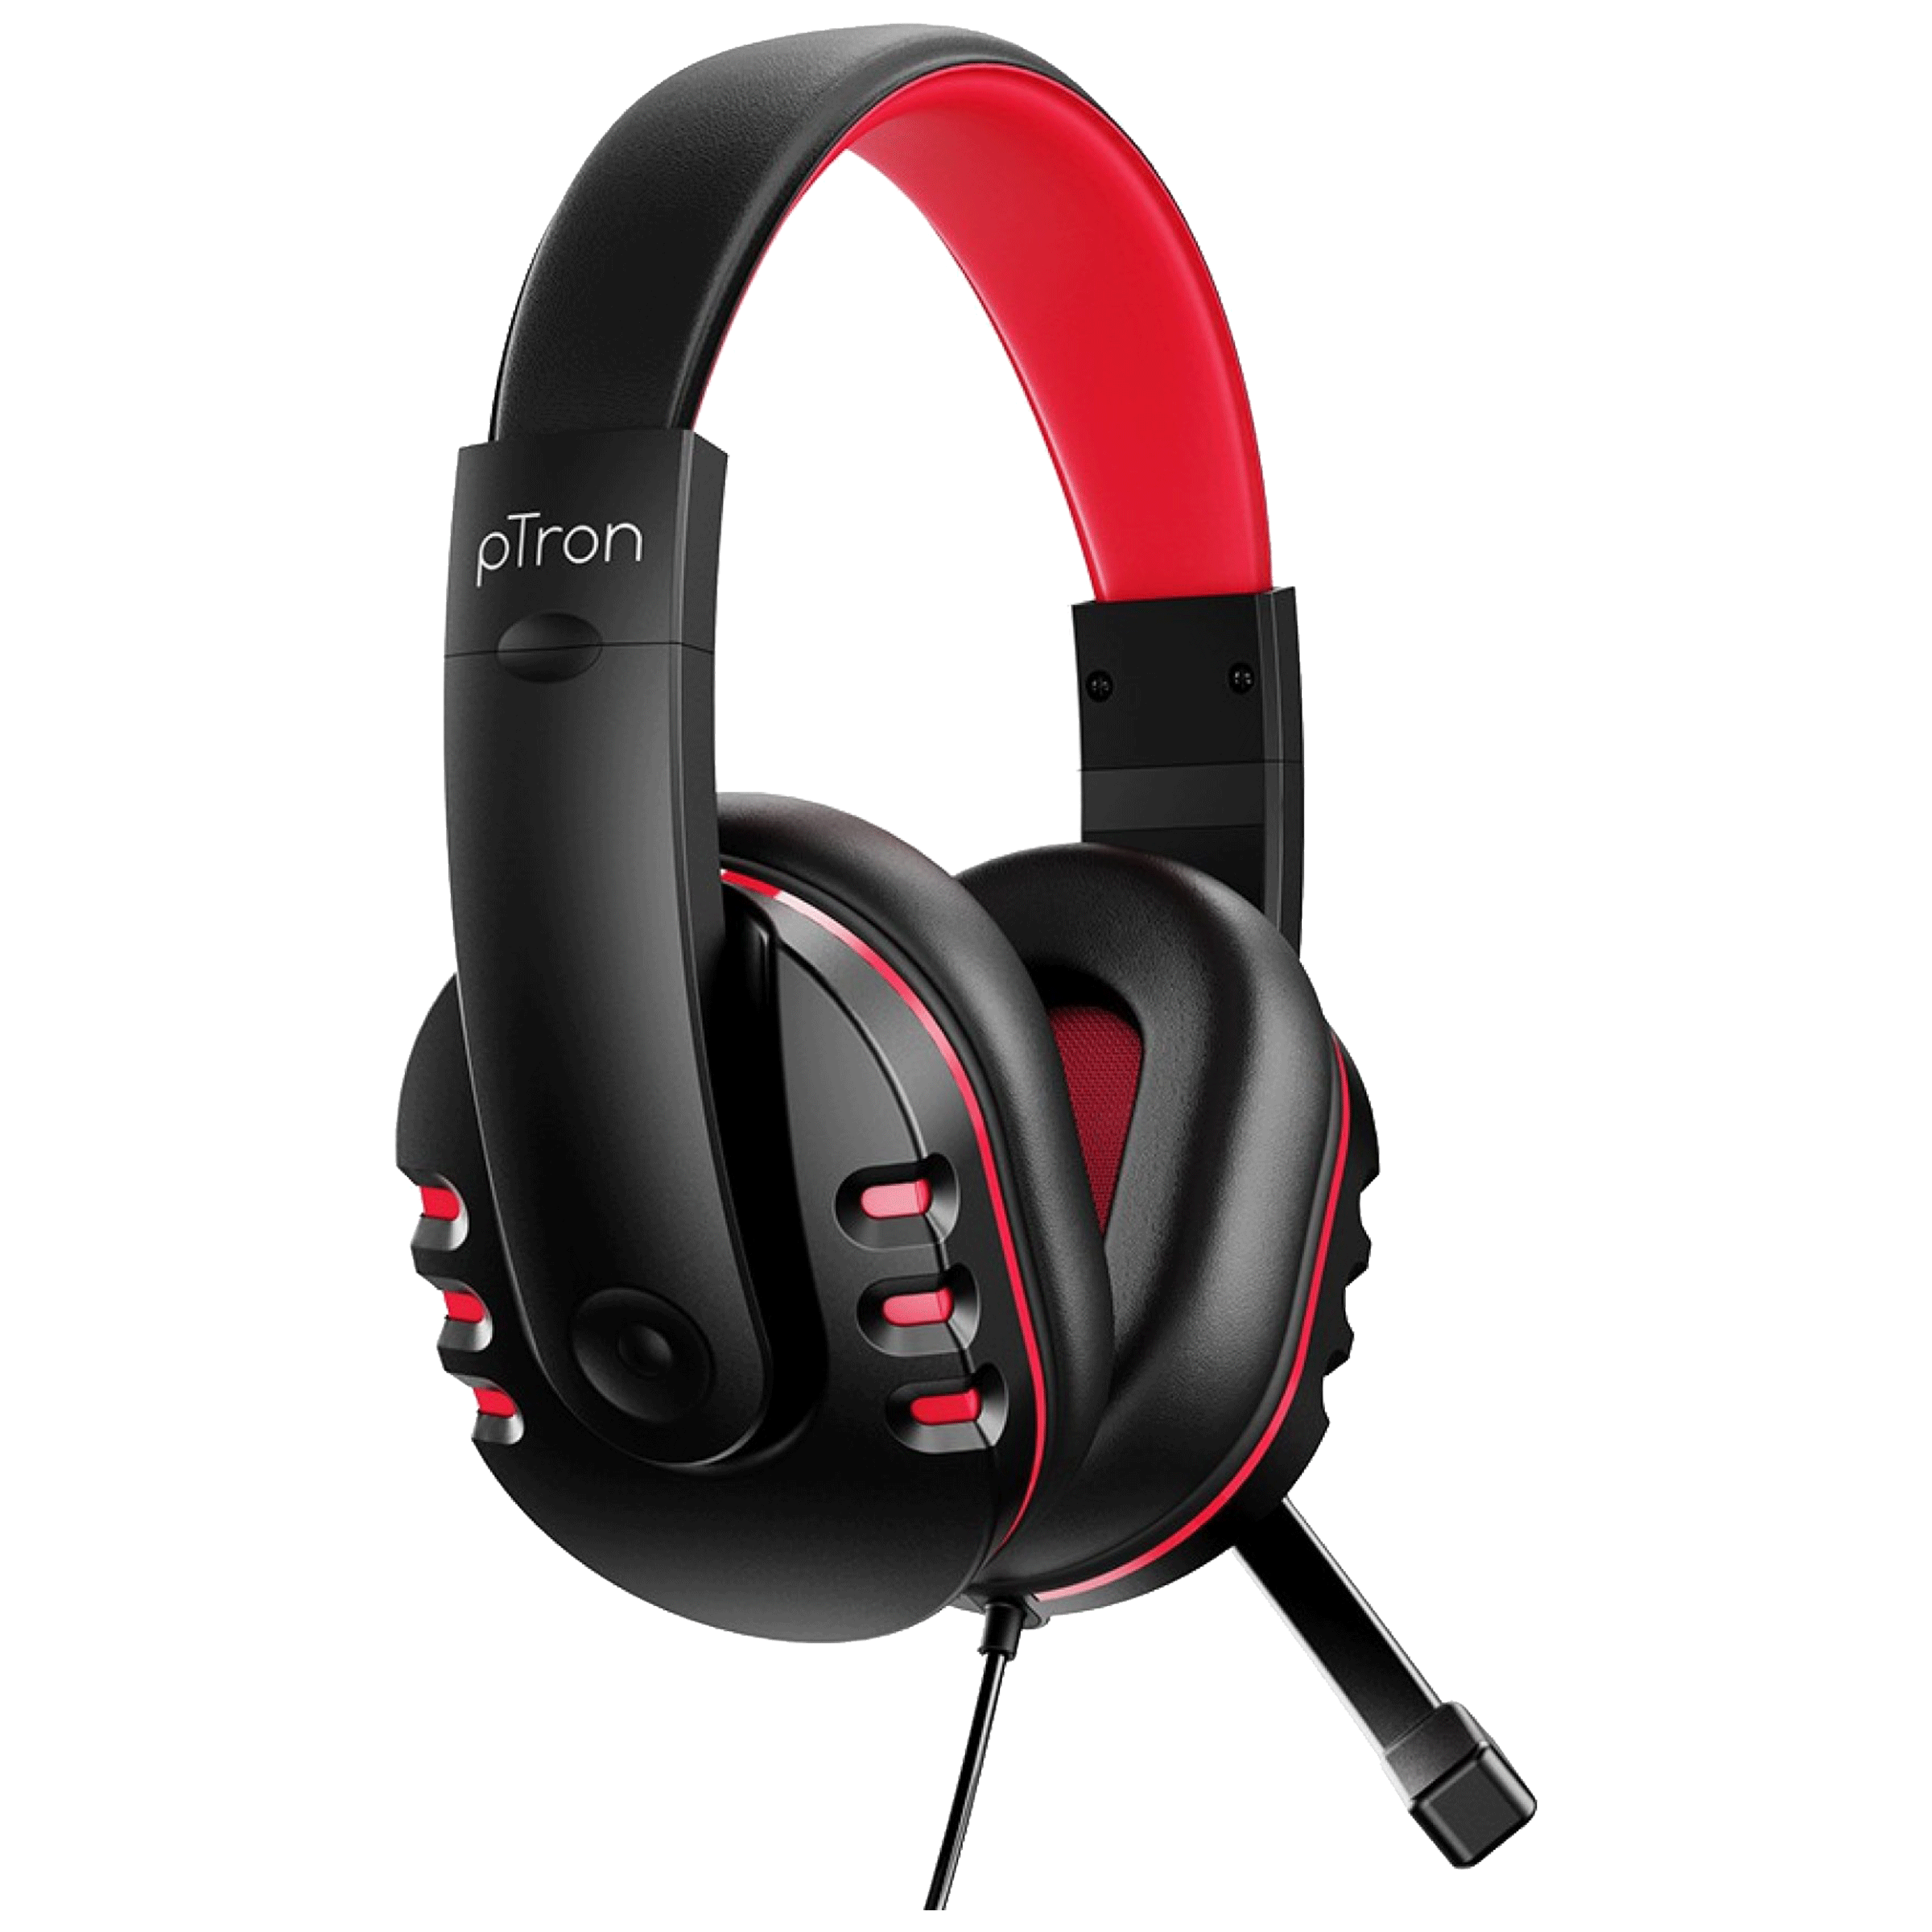 PTron - pTron Soundster Arcade Over-Ear Wired Gaming Headphone with Mic (40mm Dynamic Driver, 140317989, Black/Red)